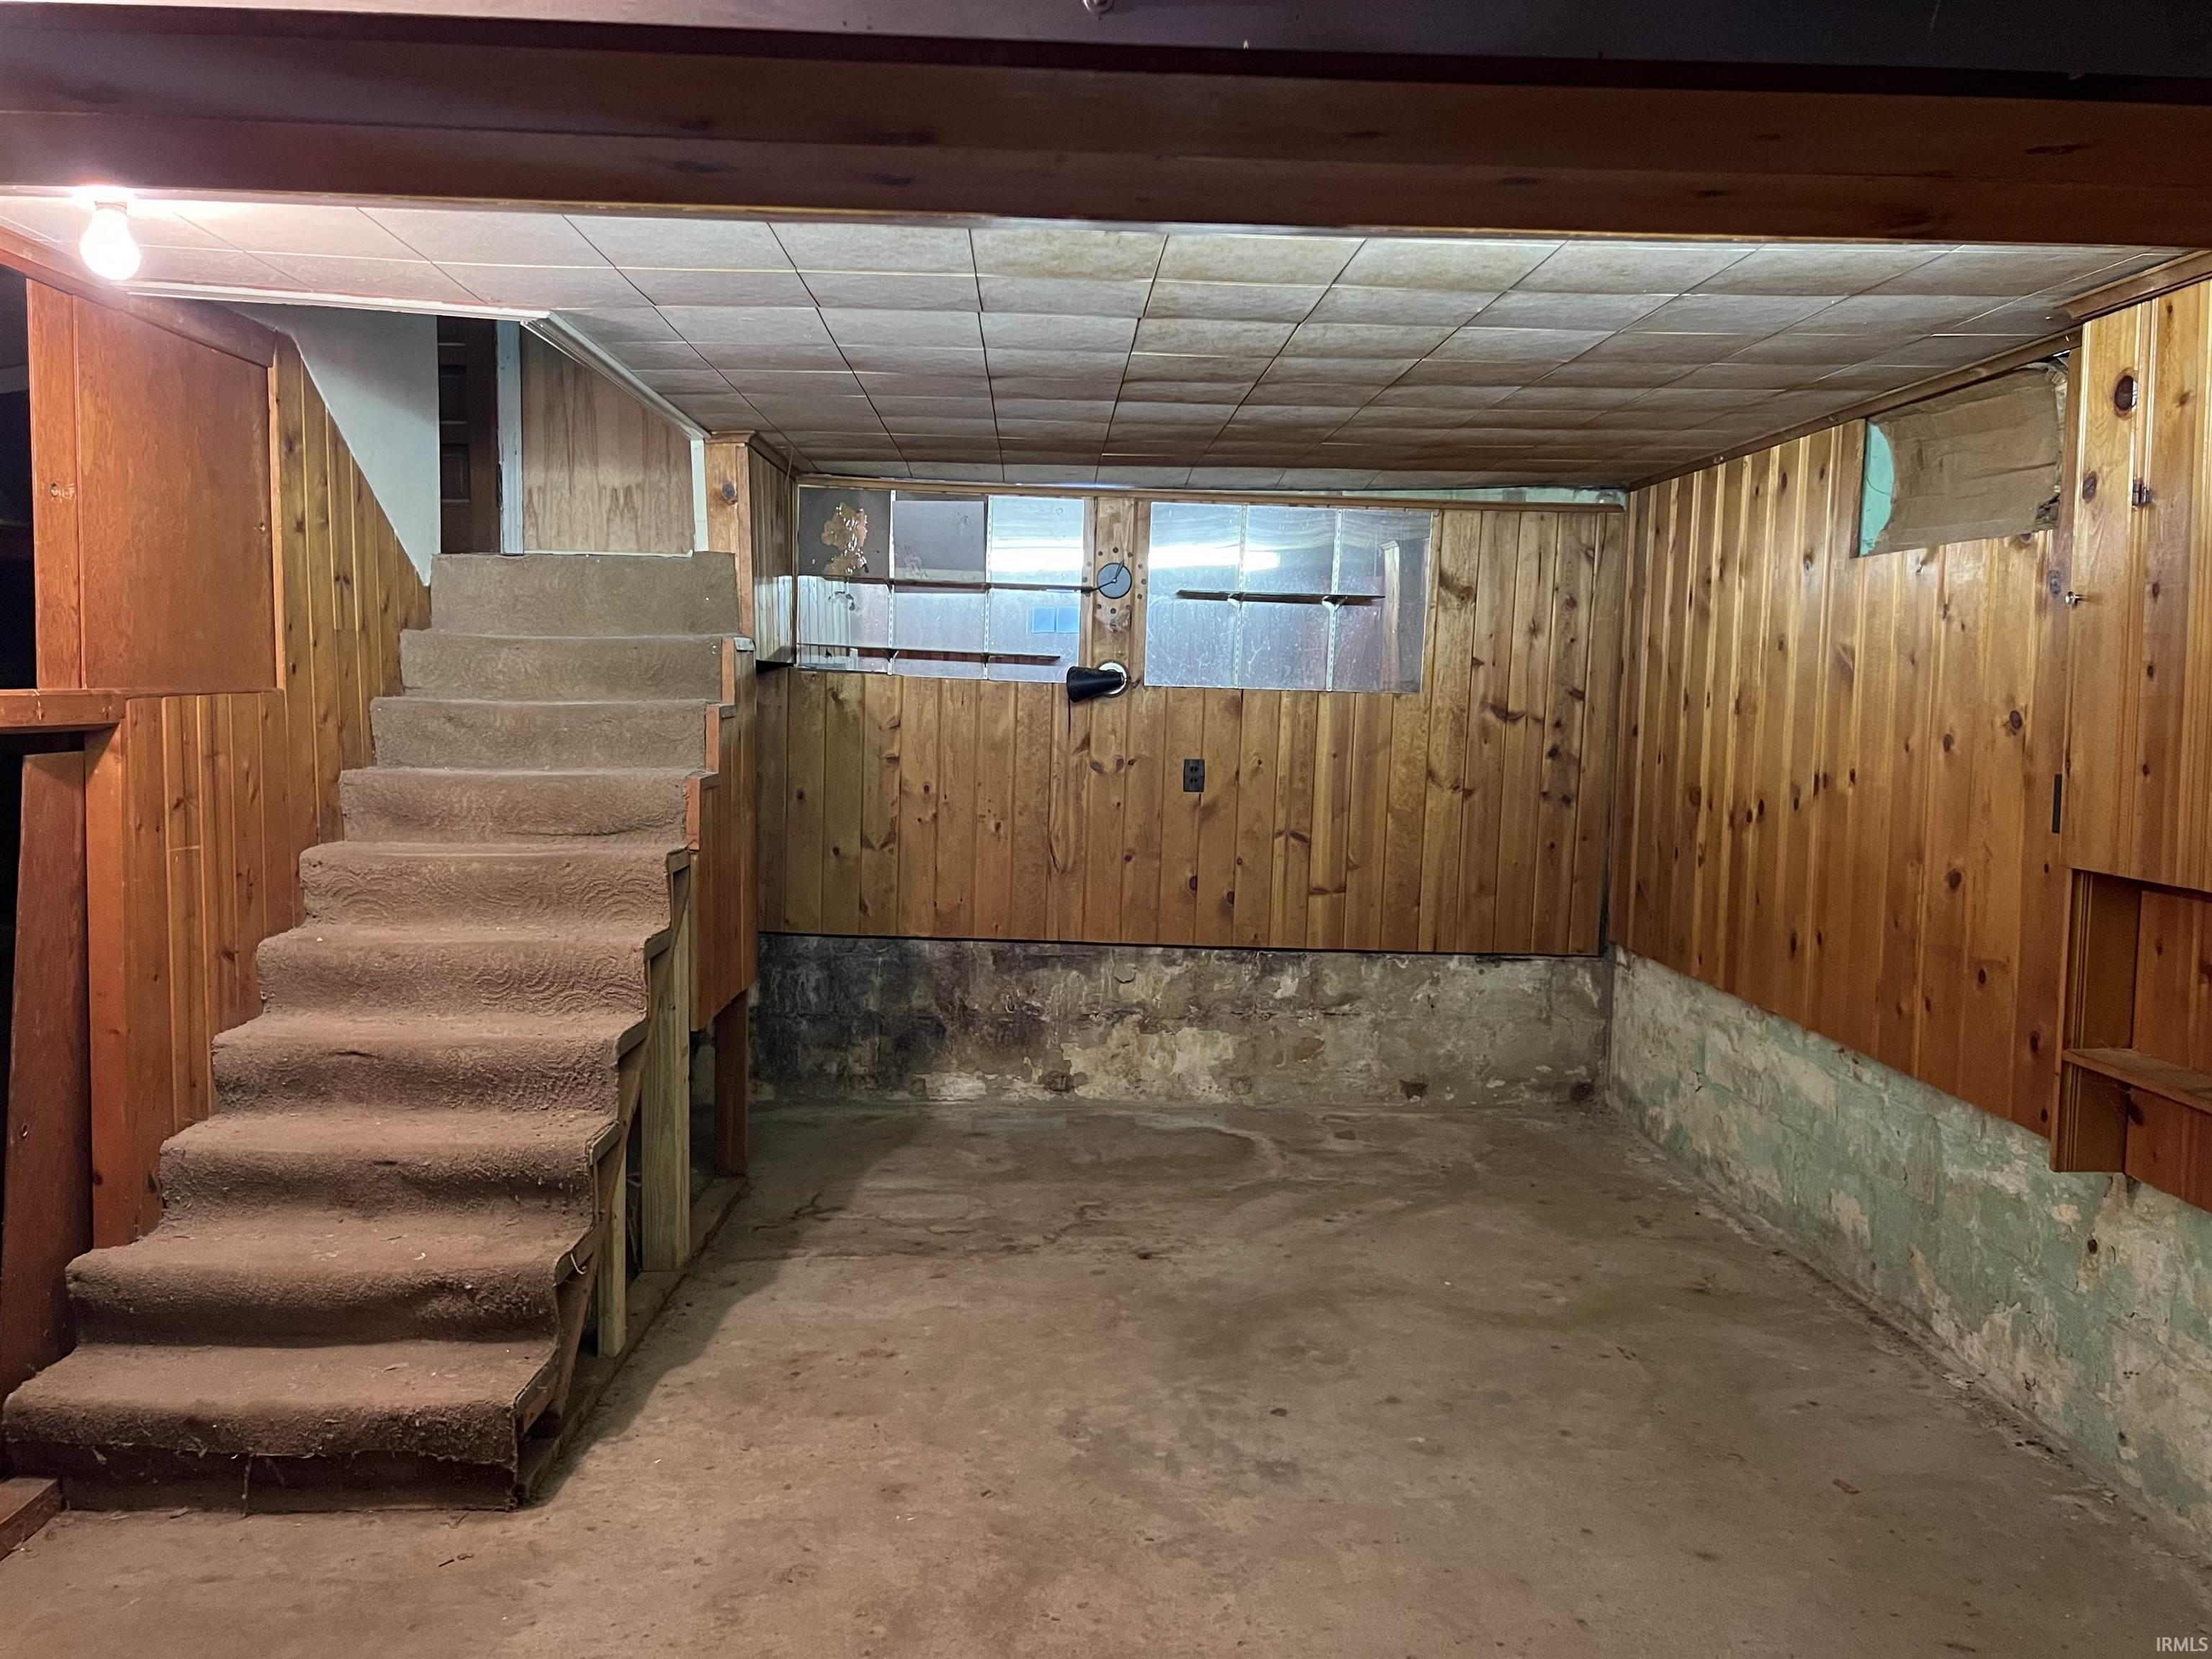 The Basement offers plenty of storage, and there used to be a bar area in the first room.